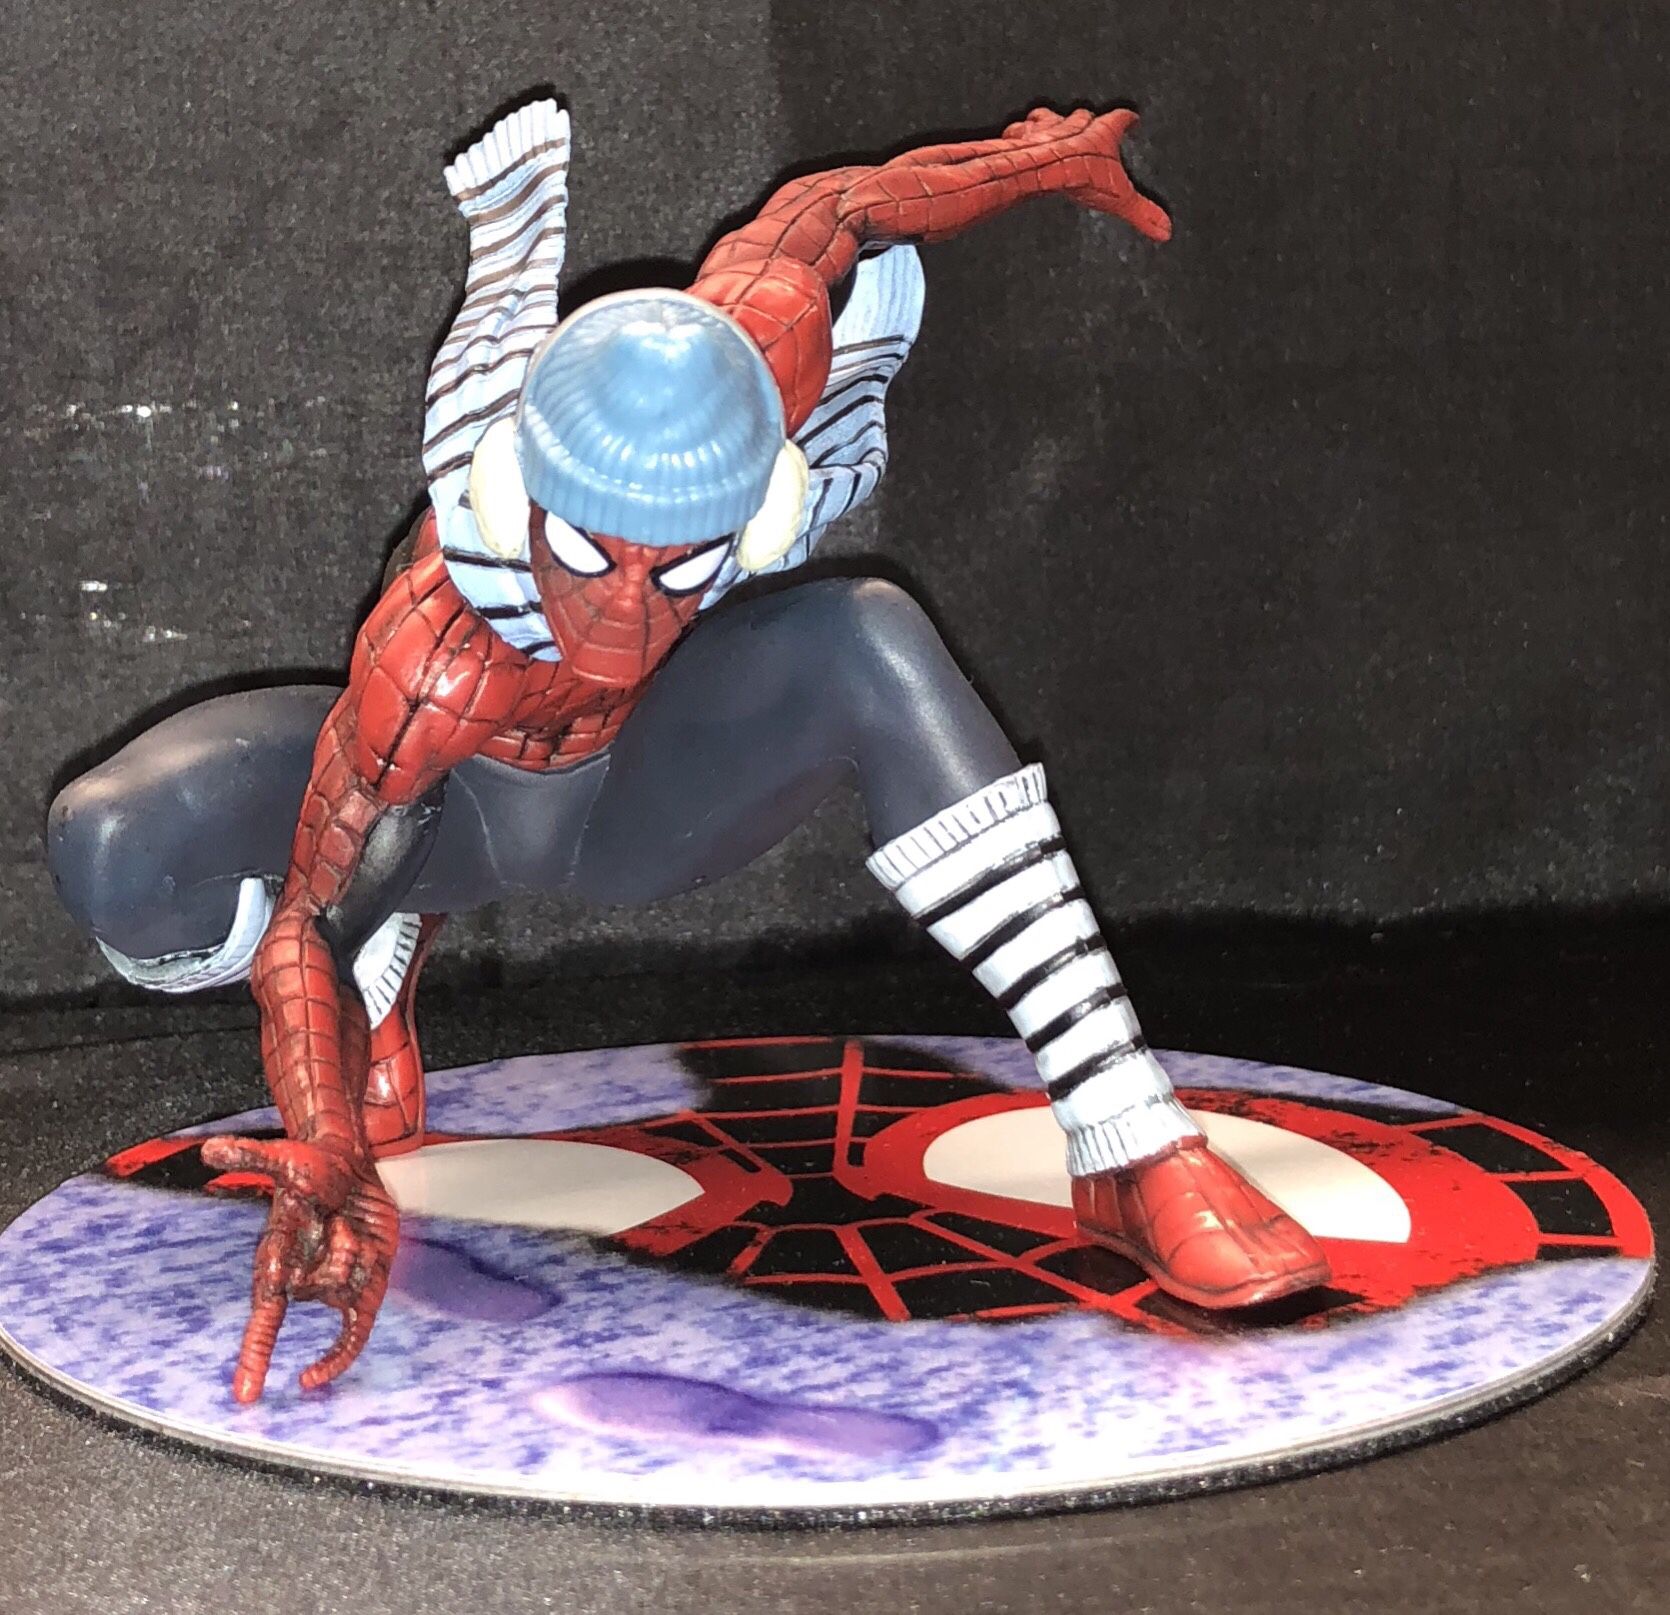 Spider-man winter variant artfx statue magnetic base. Spiderman collectible